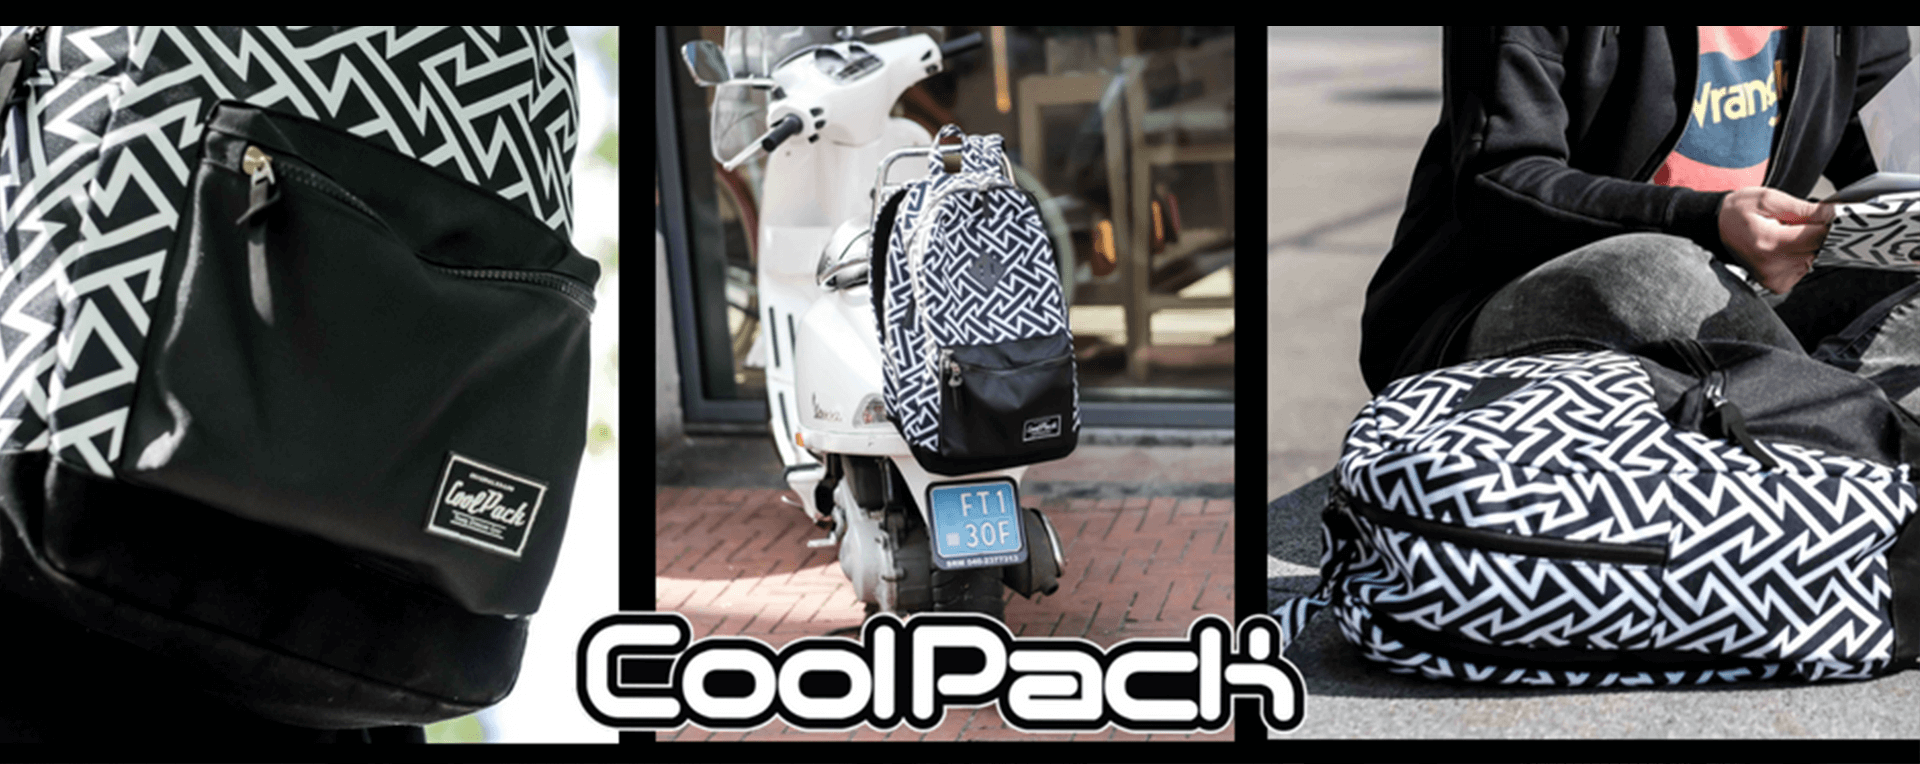 Coolpack/